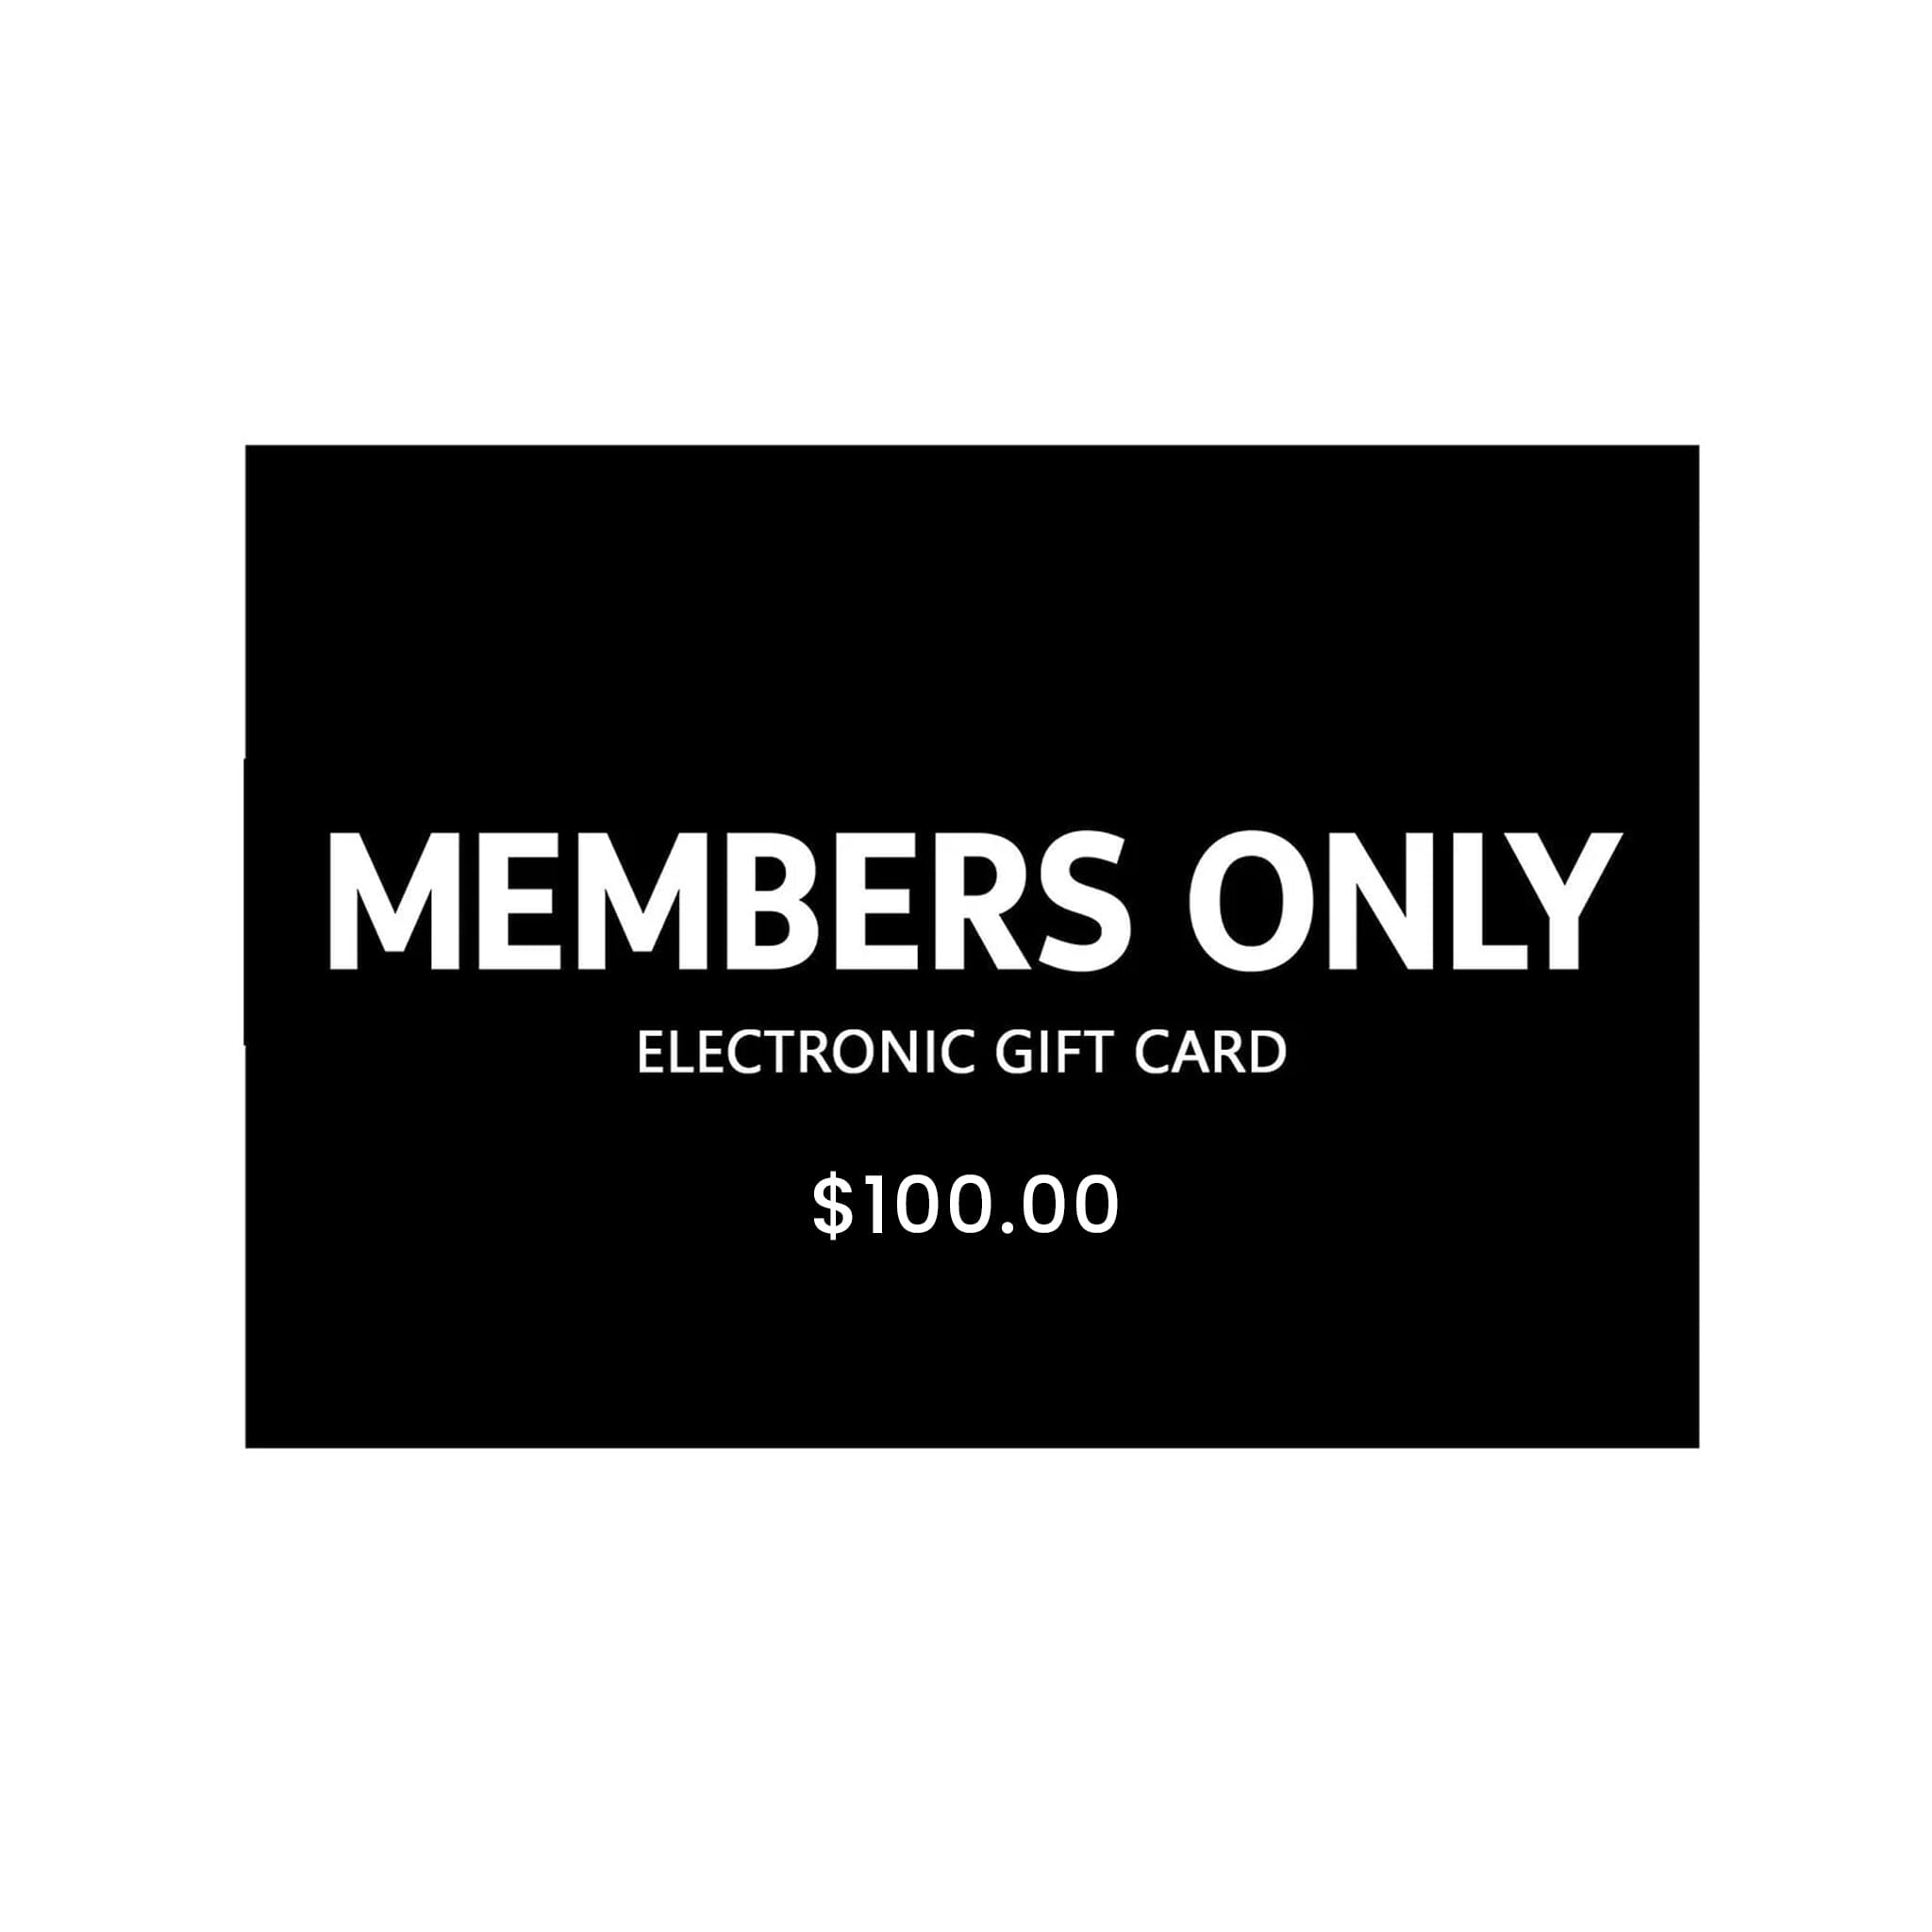 $100 Electronic Gift Card gift cards Members Only $100.00 